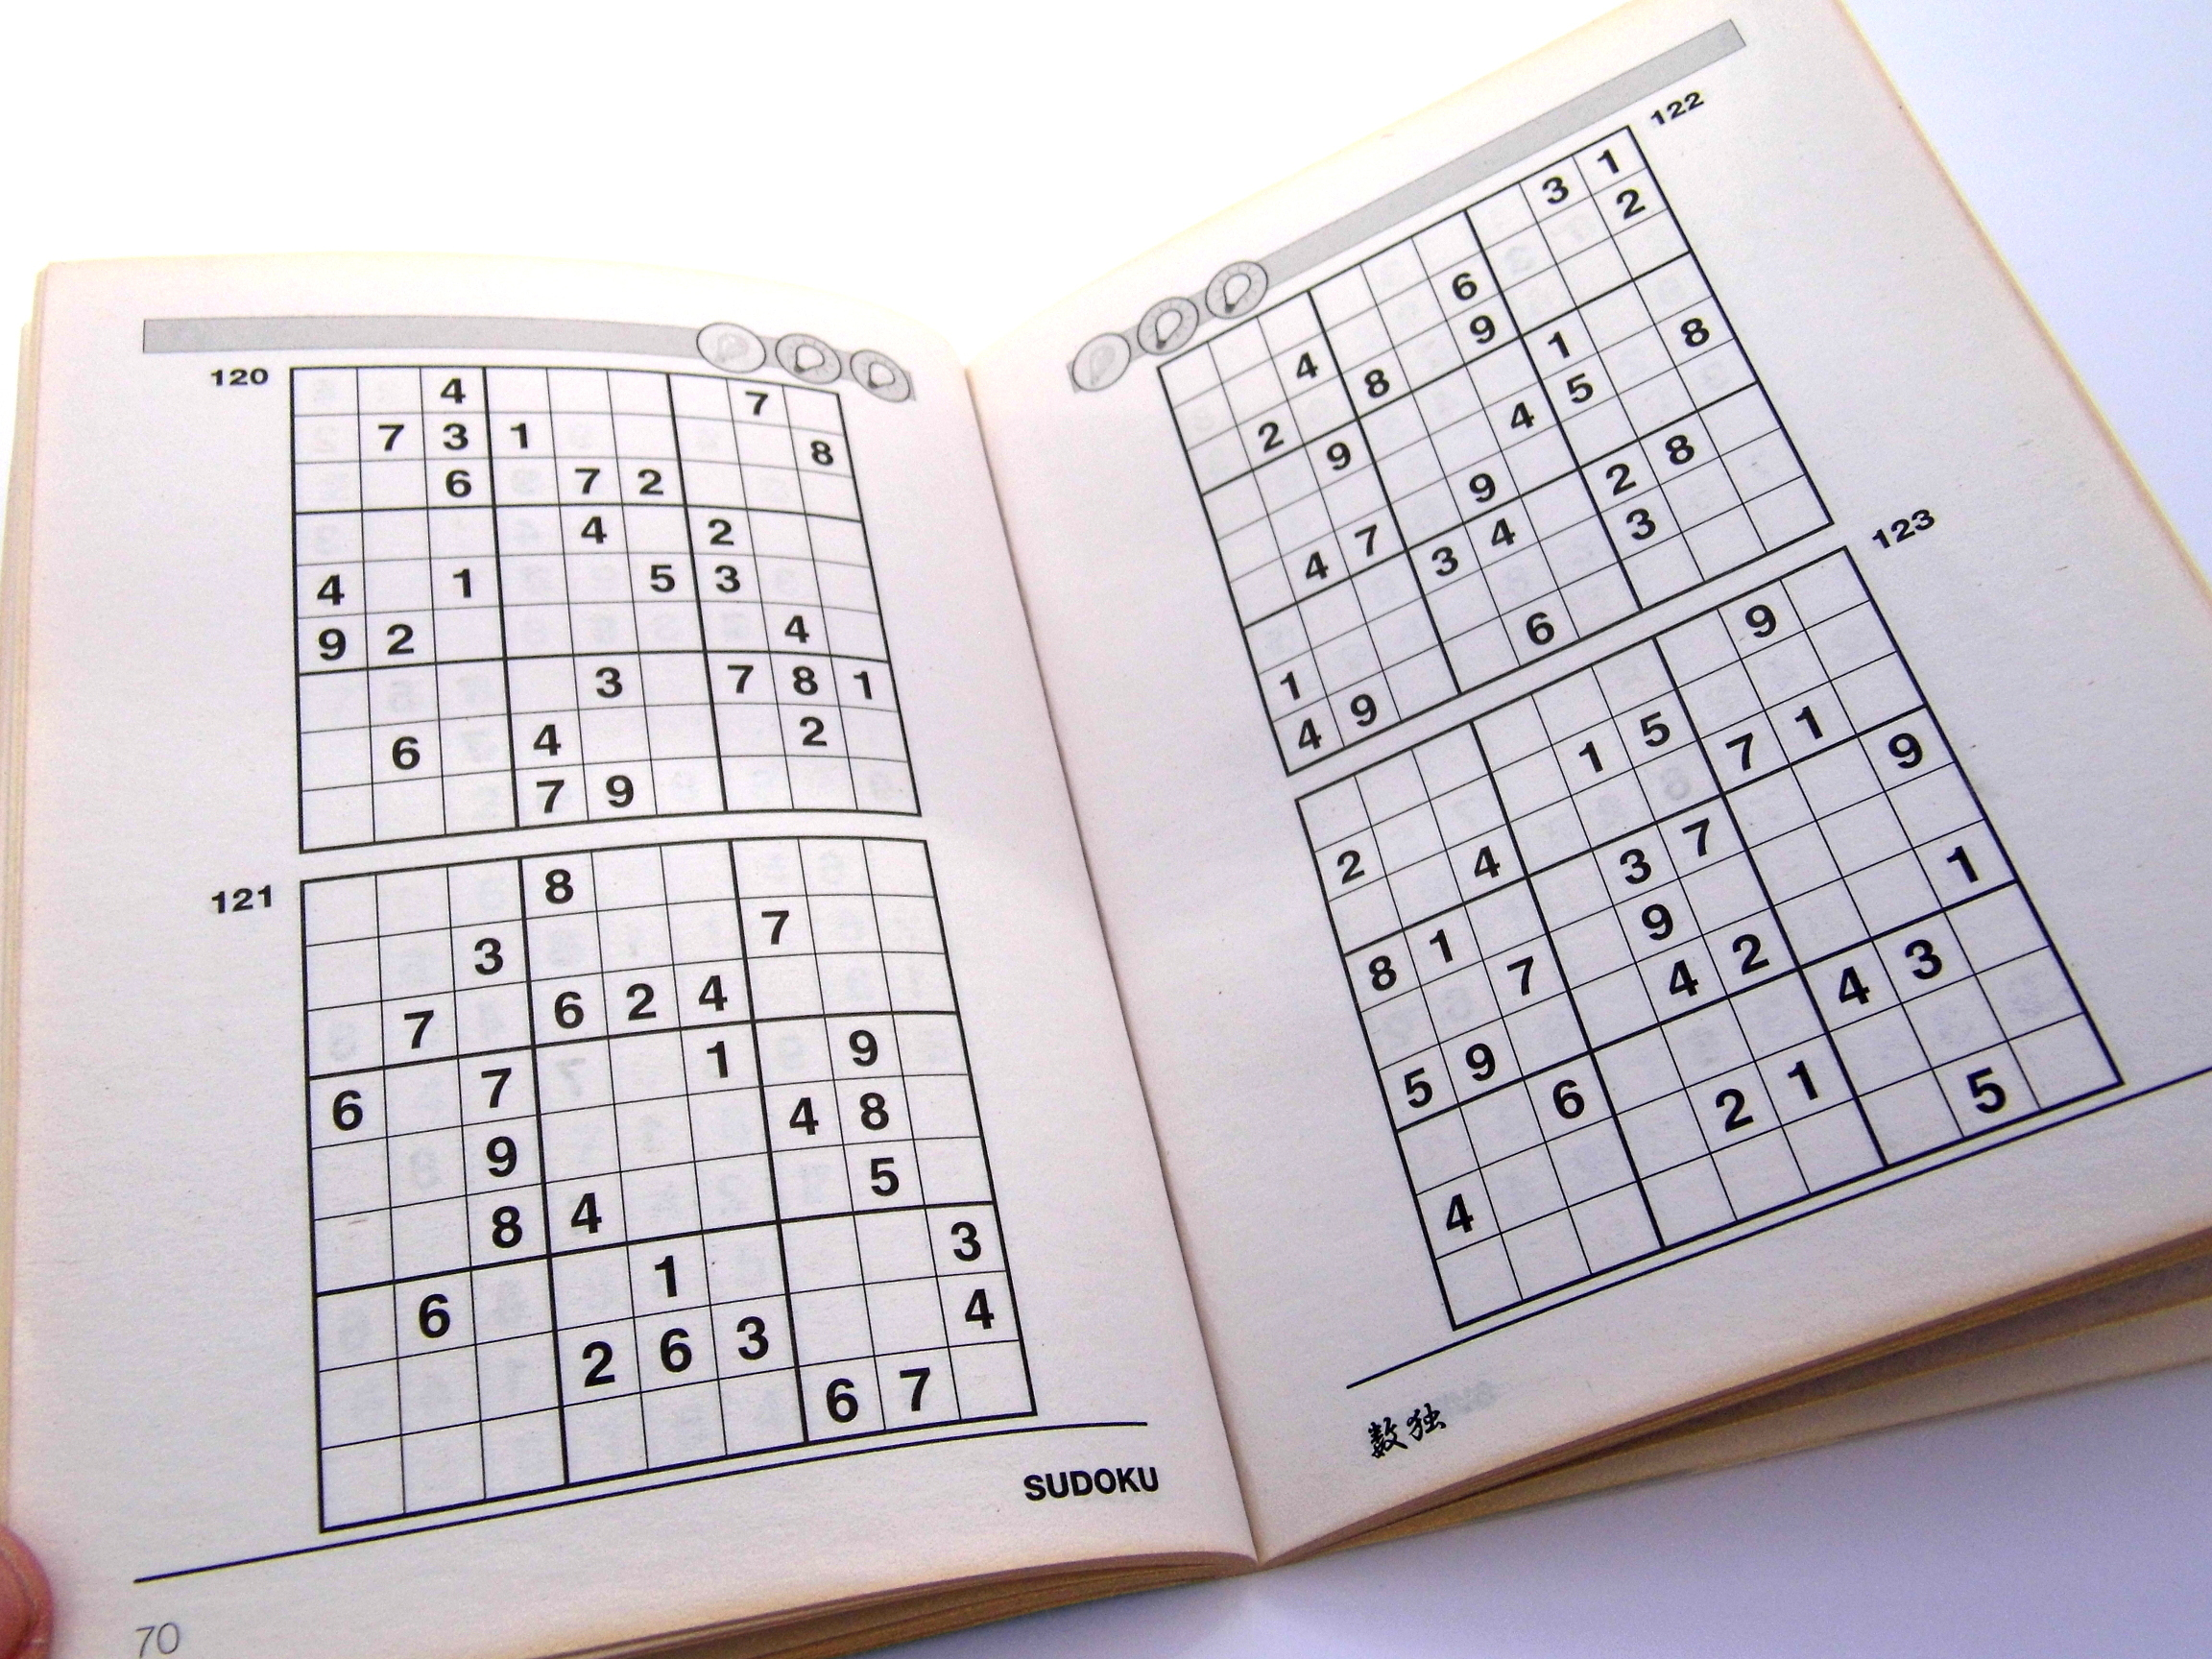 Free Sudoku Puzzles – Free Sudoku Puzzles From Easy To Evil Level - Printable-Puzzles.com Answers